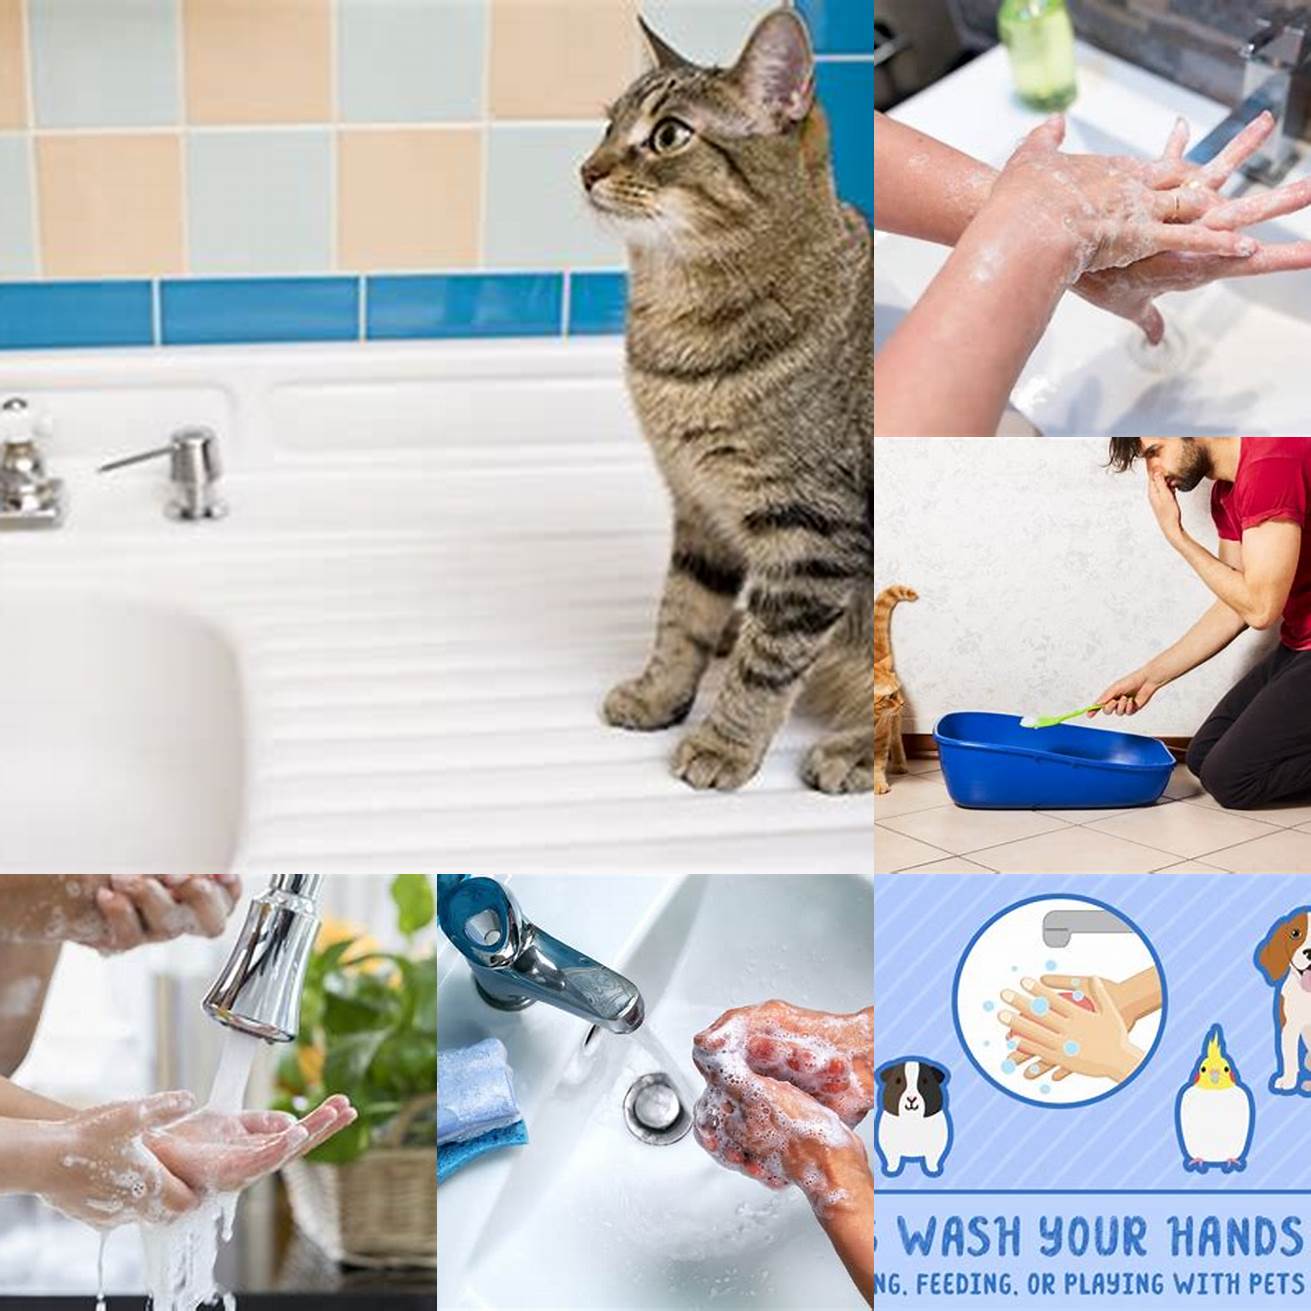 Washing your hands thoroughly after handling cat litter can help prevent the transmission of toxoplasmosis